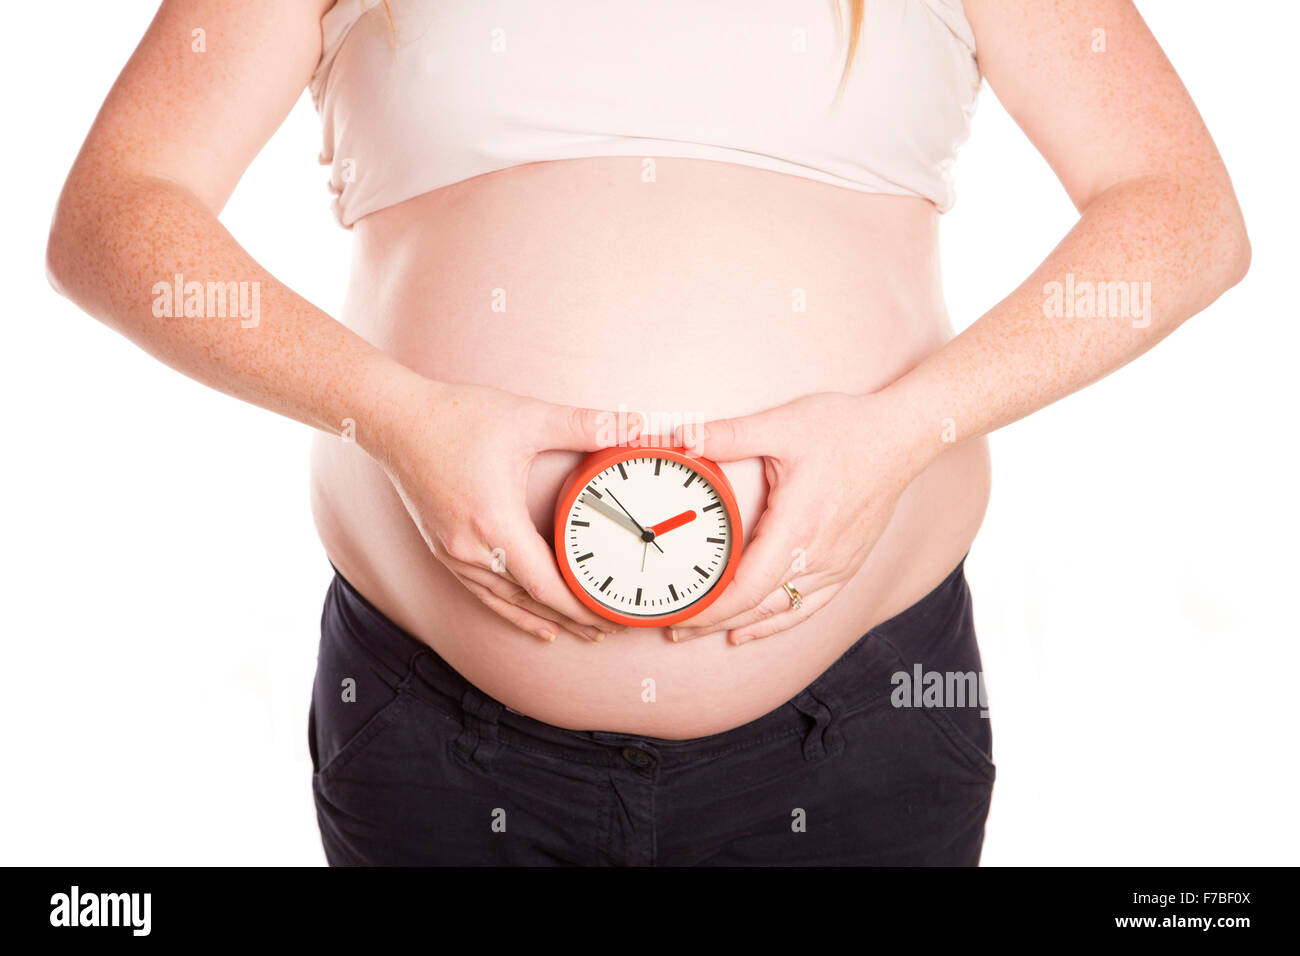 Pregnant women holding a clock on white background Stock Photo